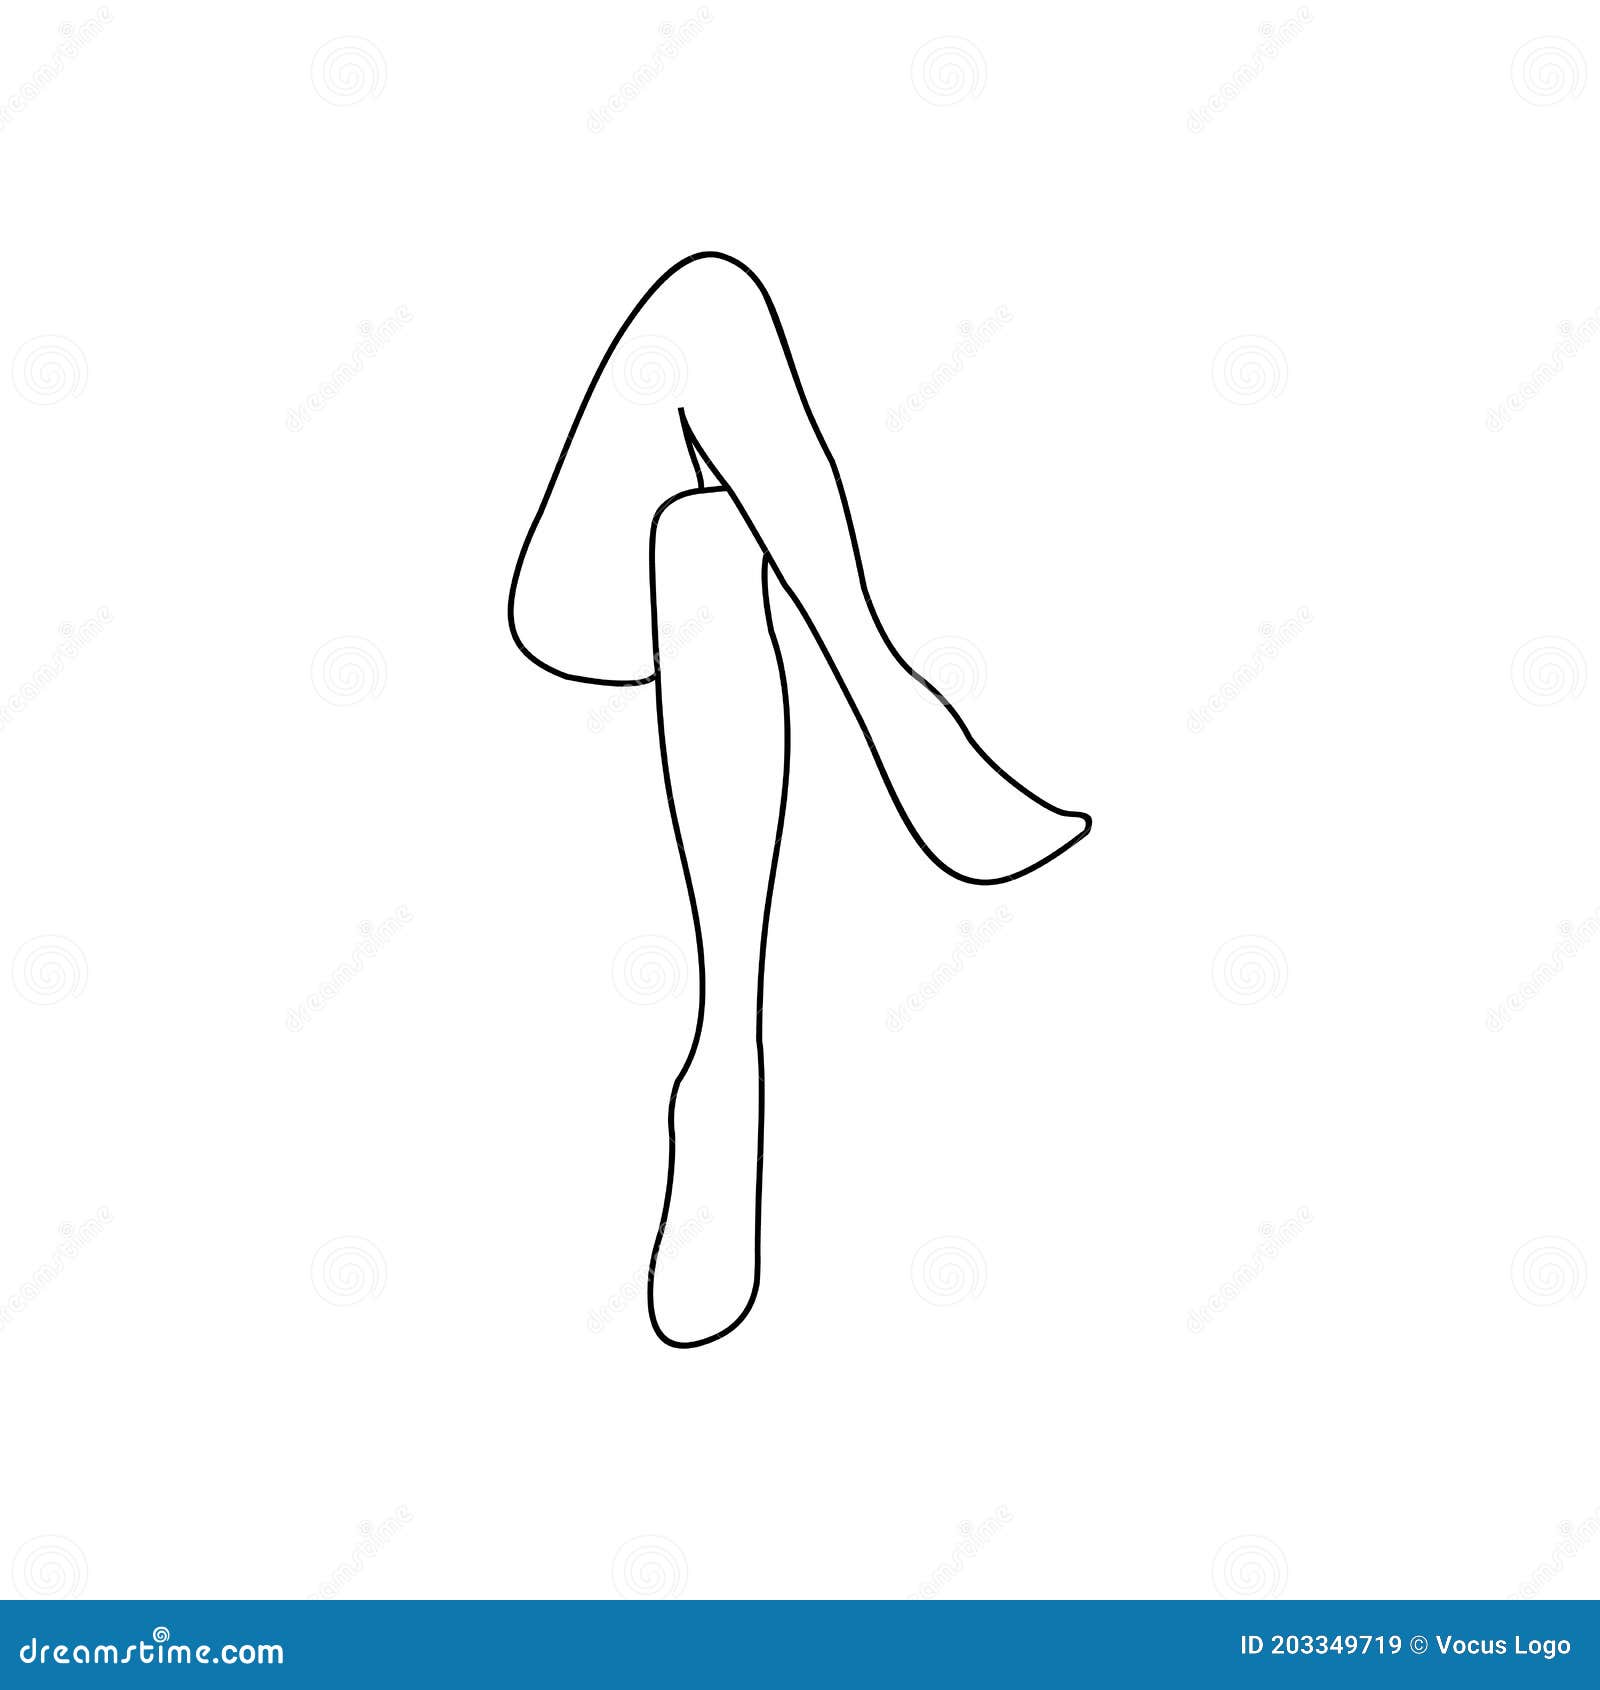 How To Draw Legs